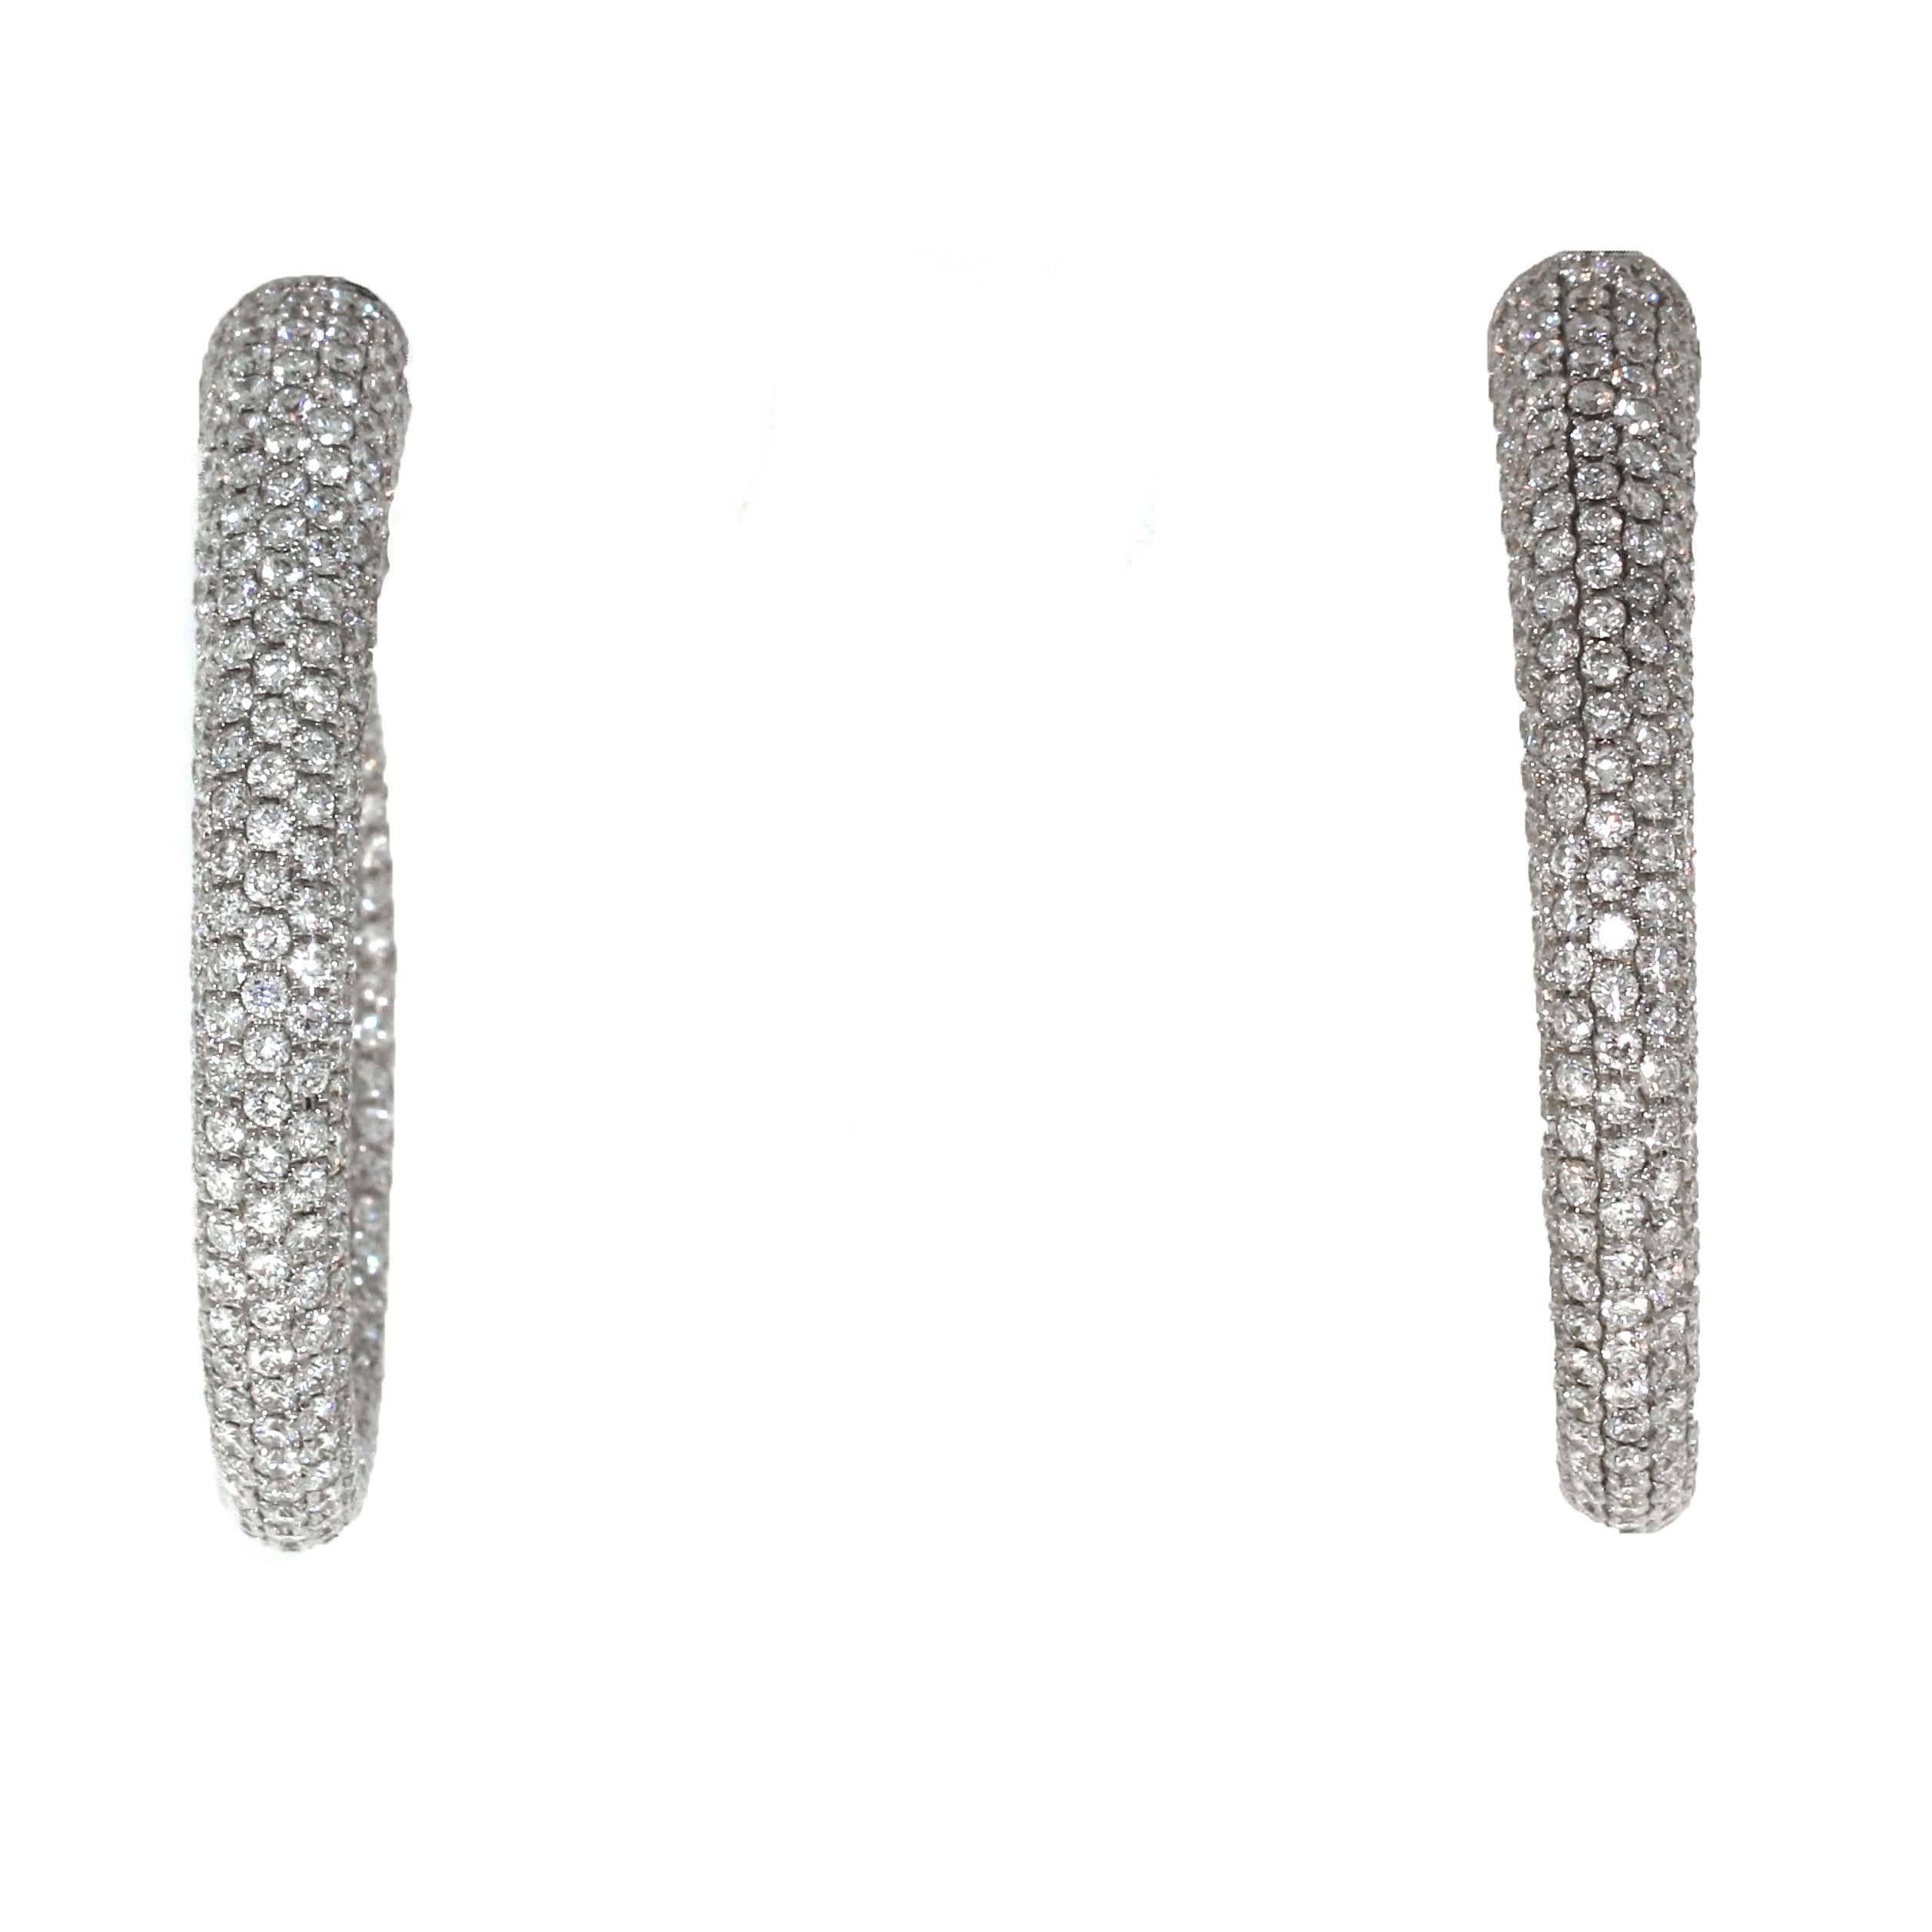 Fireball pair of earrings. Walk into the sunlight with these earrings and they become blinding. Gorgeous pair of full pave diamond hoops containing over 13.20 carats of white diamonds. Very high quality diamonds set in 18kt white gold not 14kt white